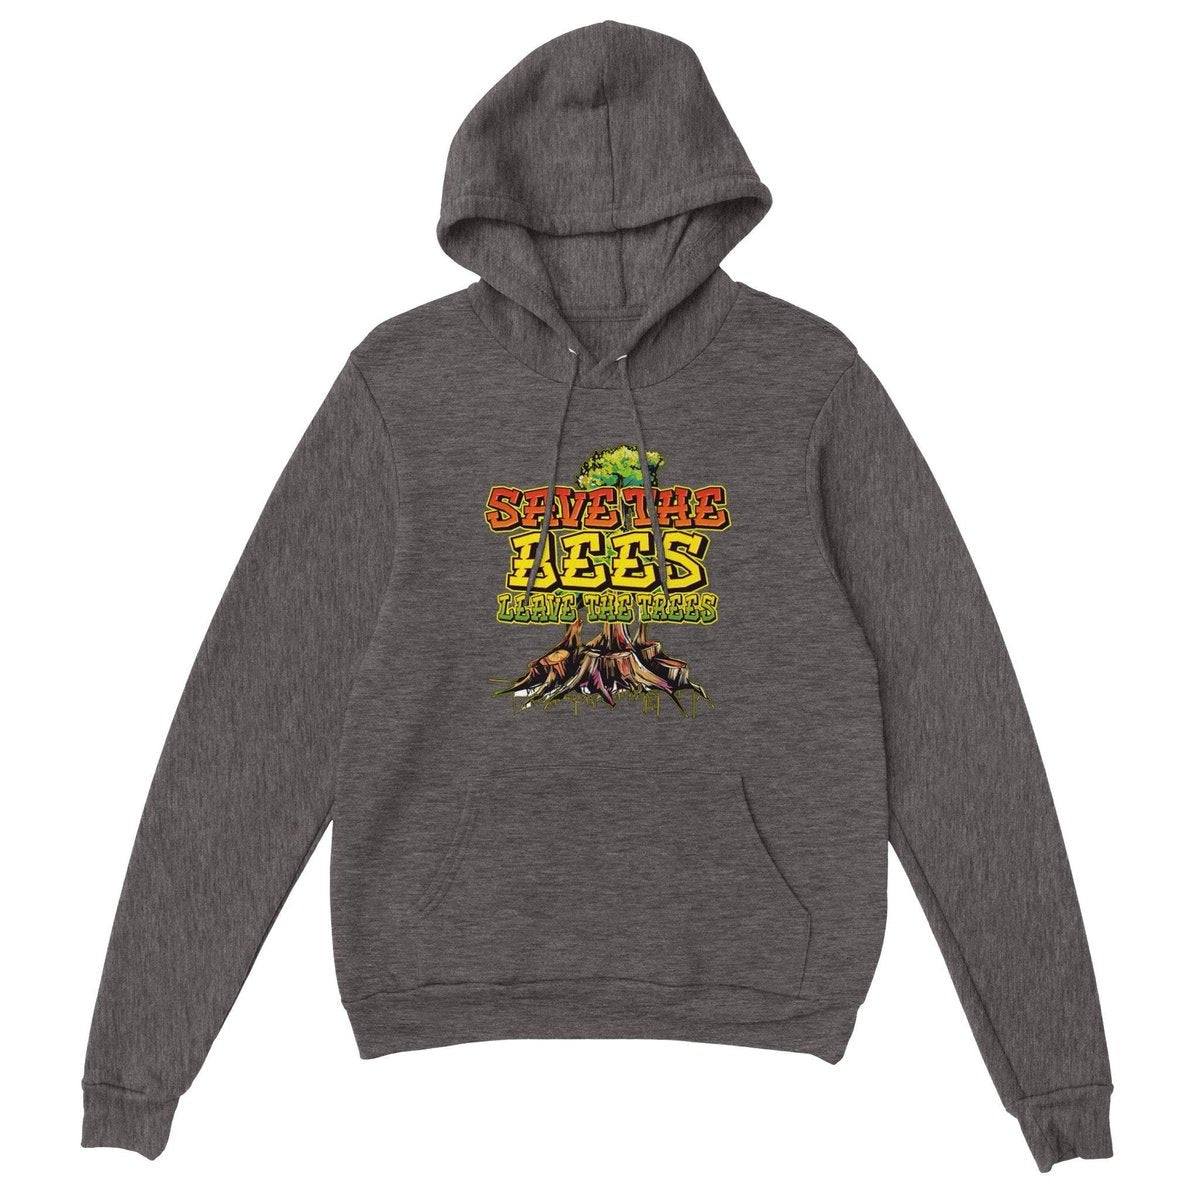 Save The Bees Hoodie - Leave The Trees - Stumps - Premium Unisex Pullover Hoodie Australia Online Color